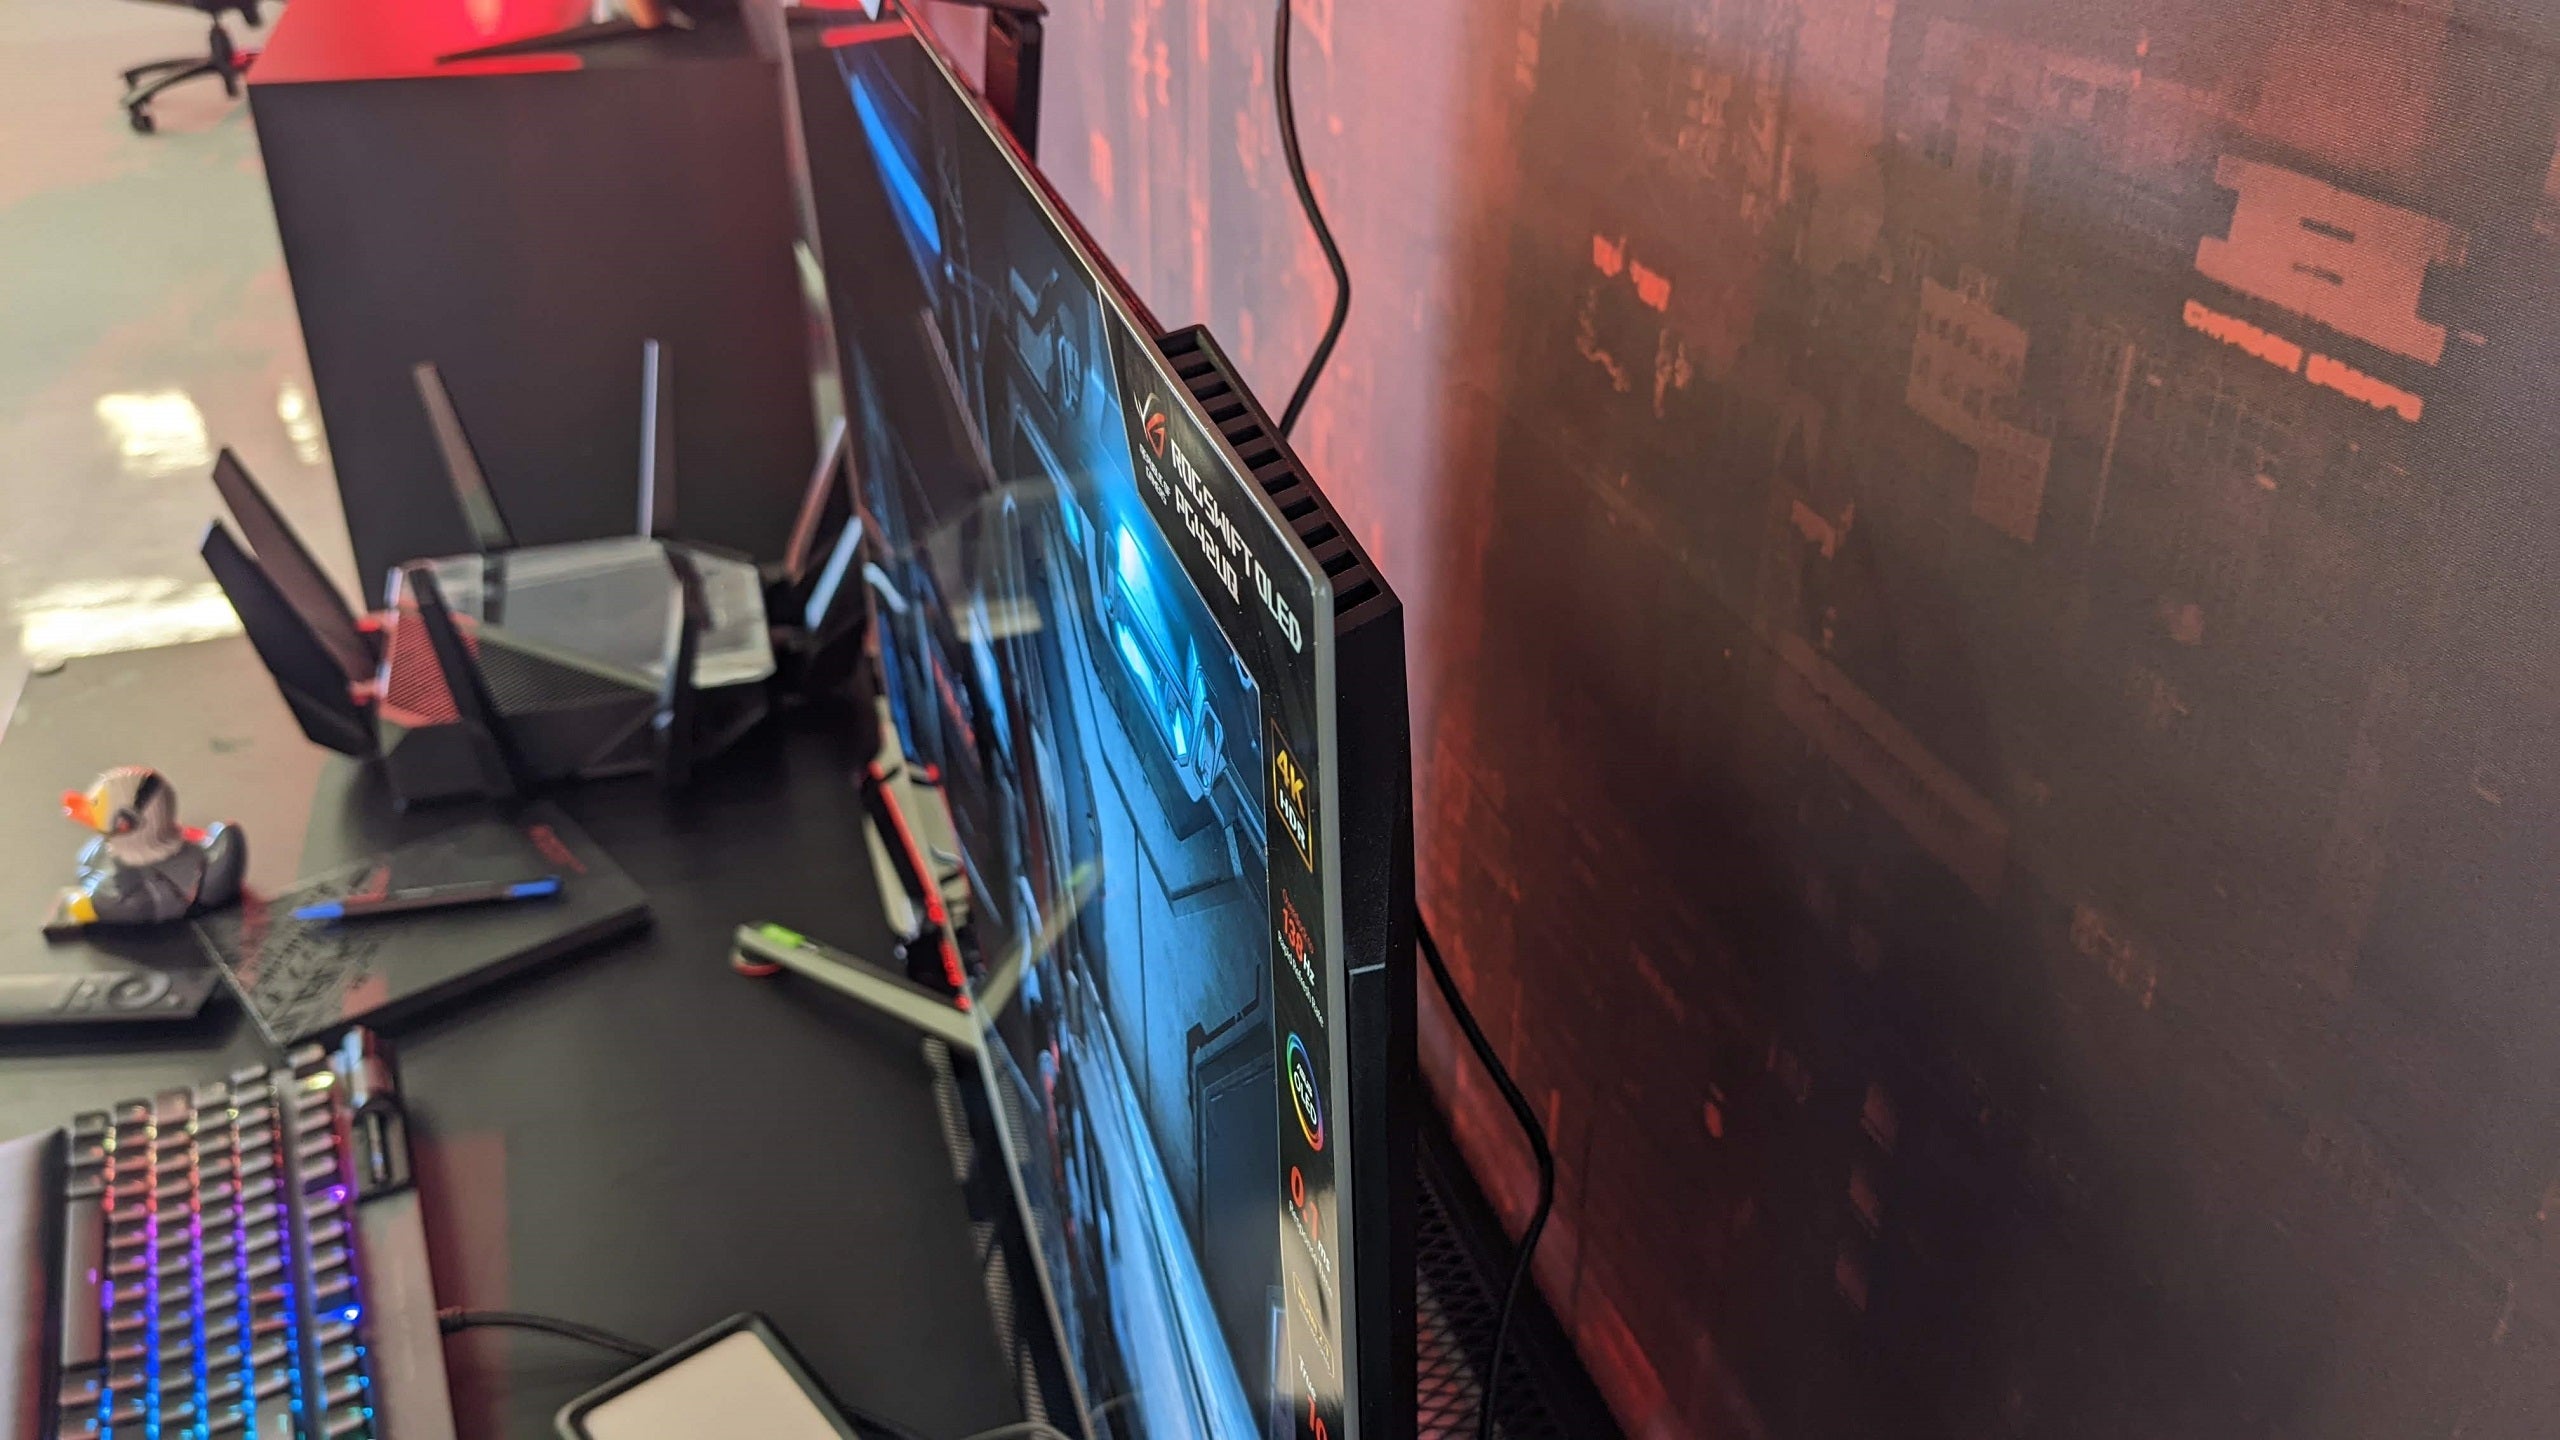 A close up on the ultra-thin bezel of an Asus ROG Swift PG42UQ gaming monitor.